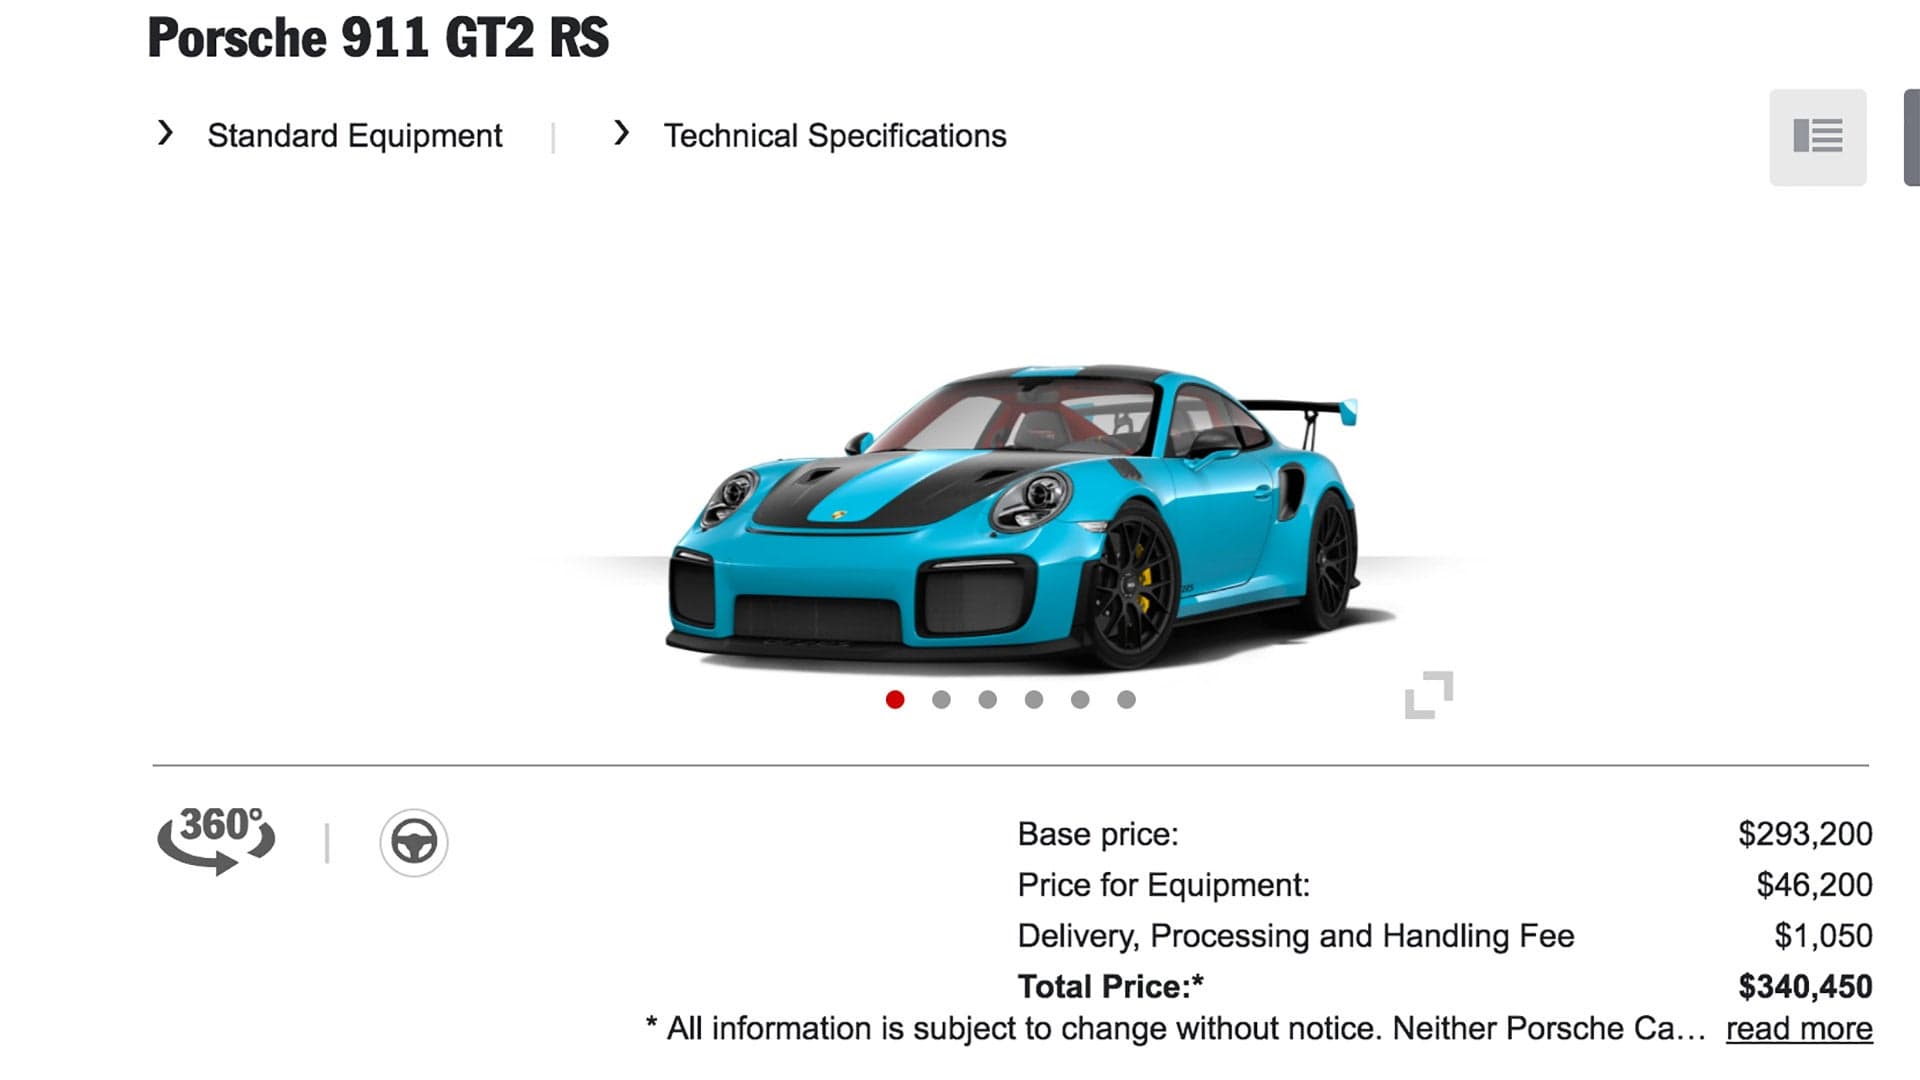 Porsche 911 GT2 RS Configurator Goes Up, Our Productivity Goes Down